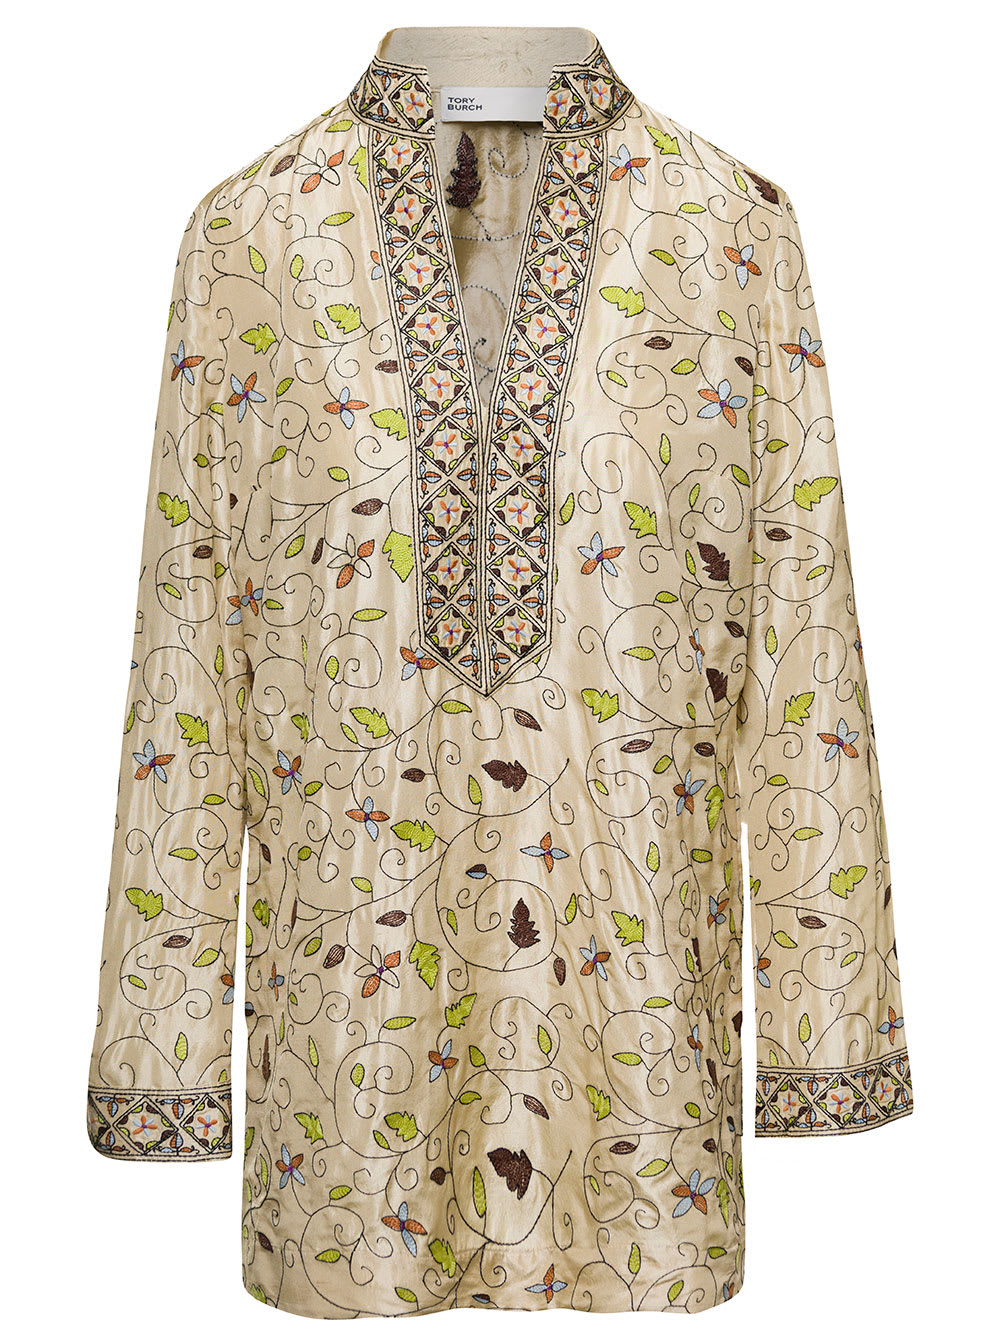 TORY BURCH MULTICOLOR EMBROIDERED LEAF-PRINT TUNIC IN SILK WOMAN